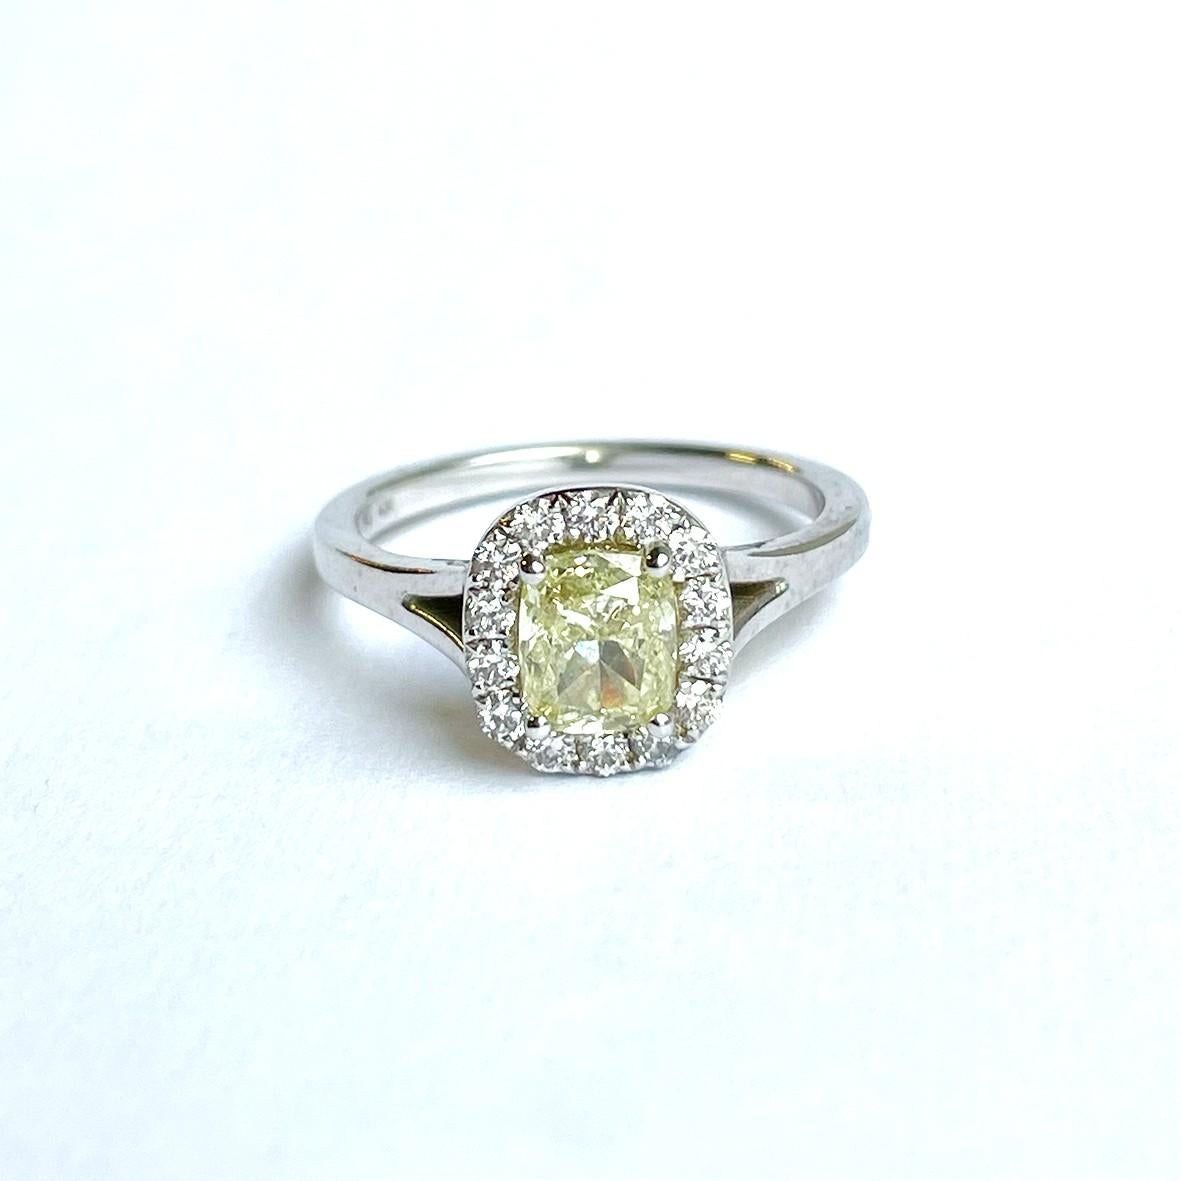 1.01ct Fancy Yellow Diamond White Gold Cluster Ring In Excellent Condition For Sale In Kilkenny, IE